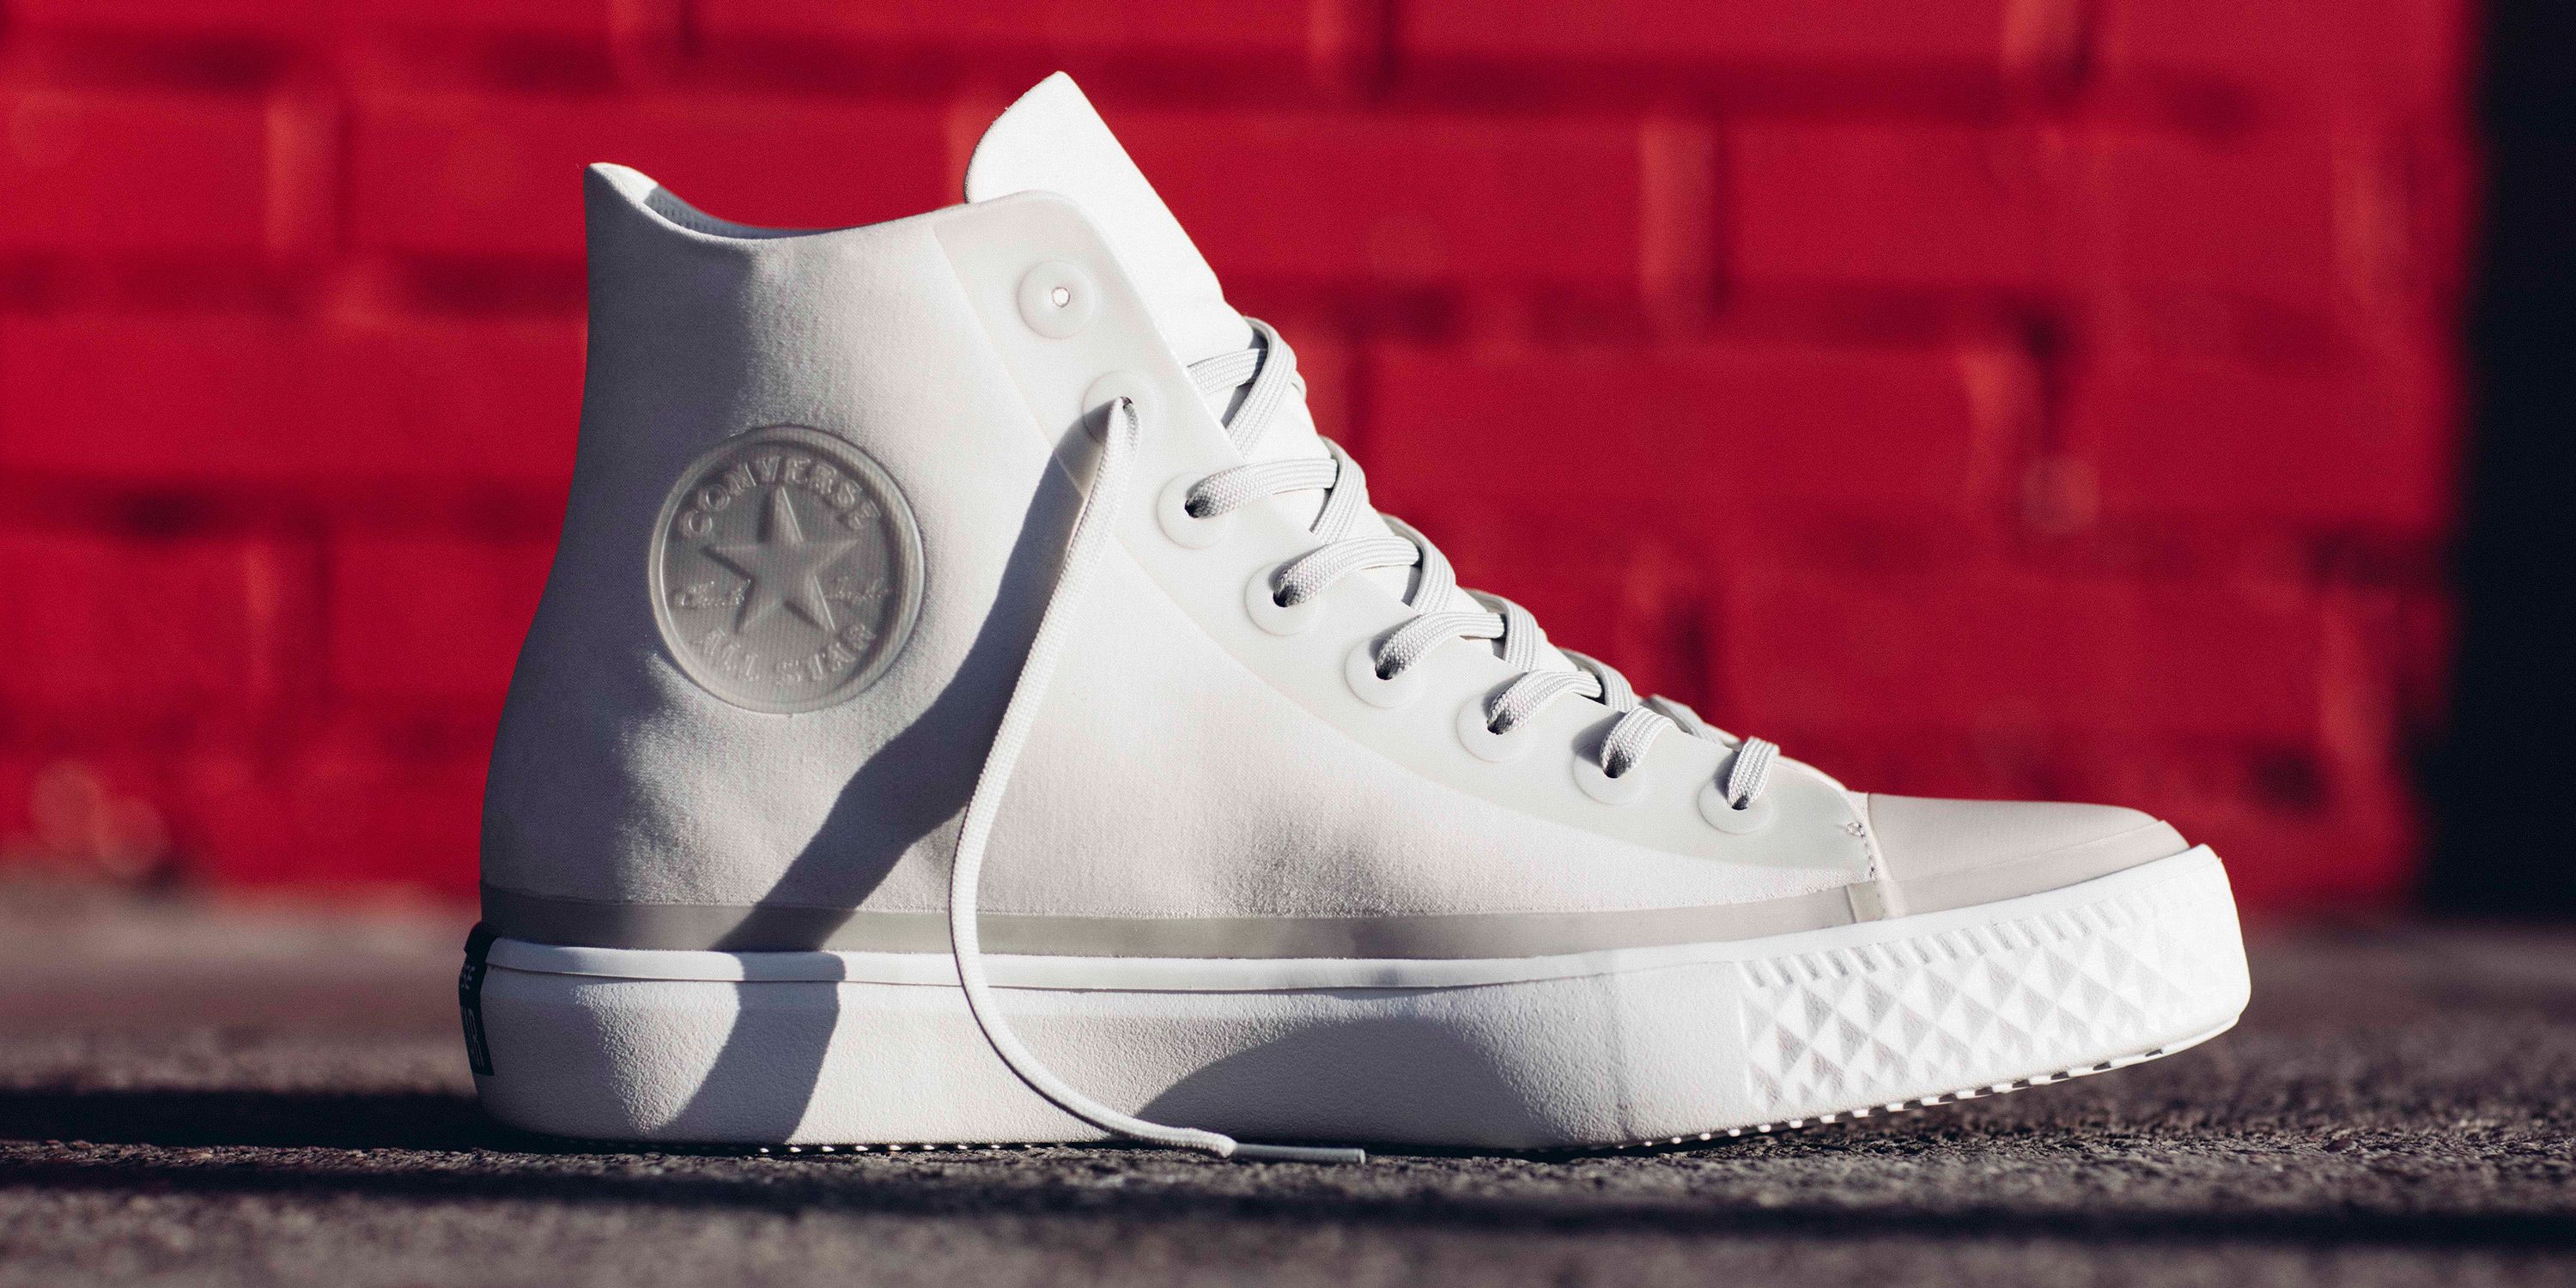 Converse Is Reimagining the Most Sneaker All Time